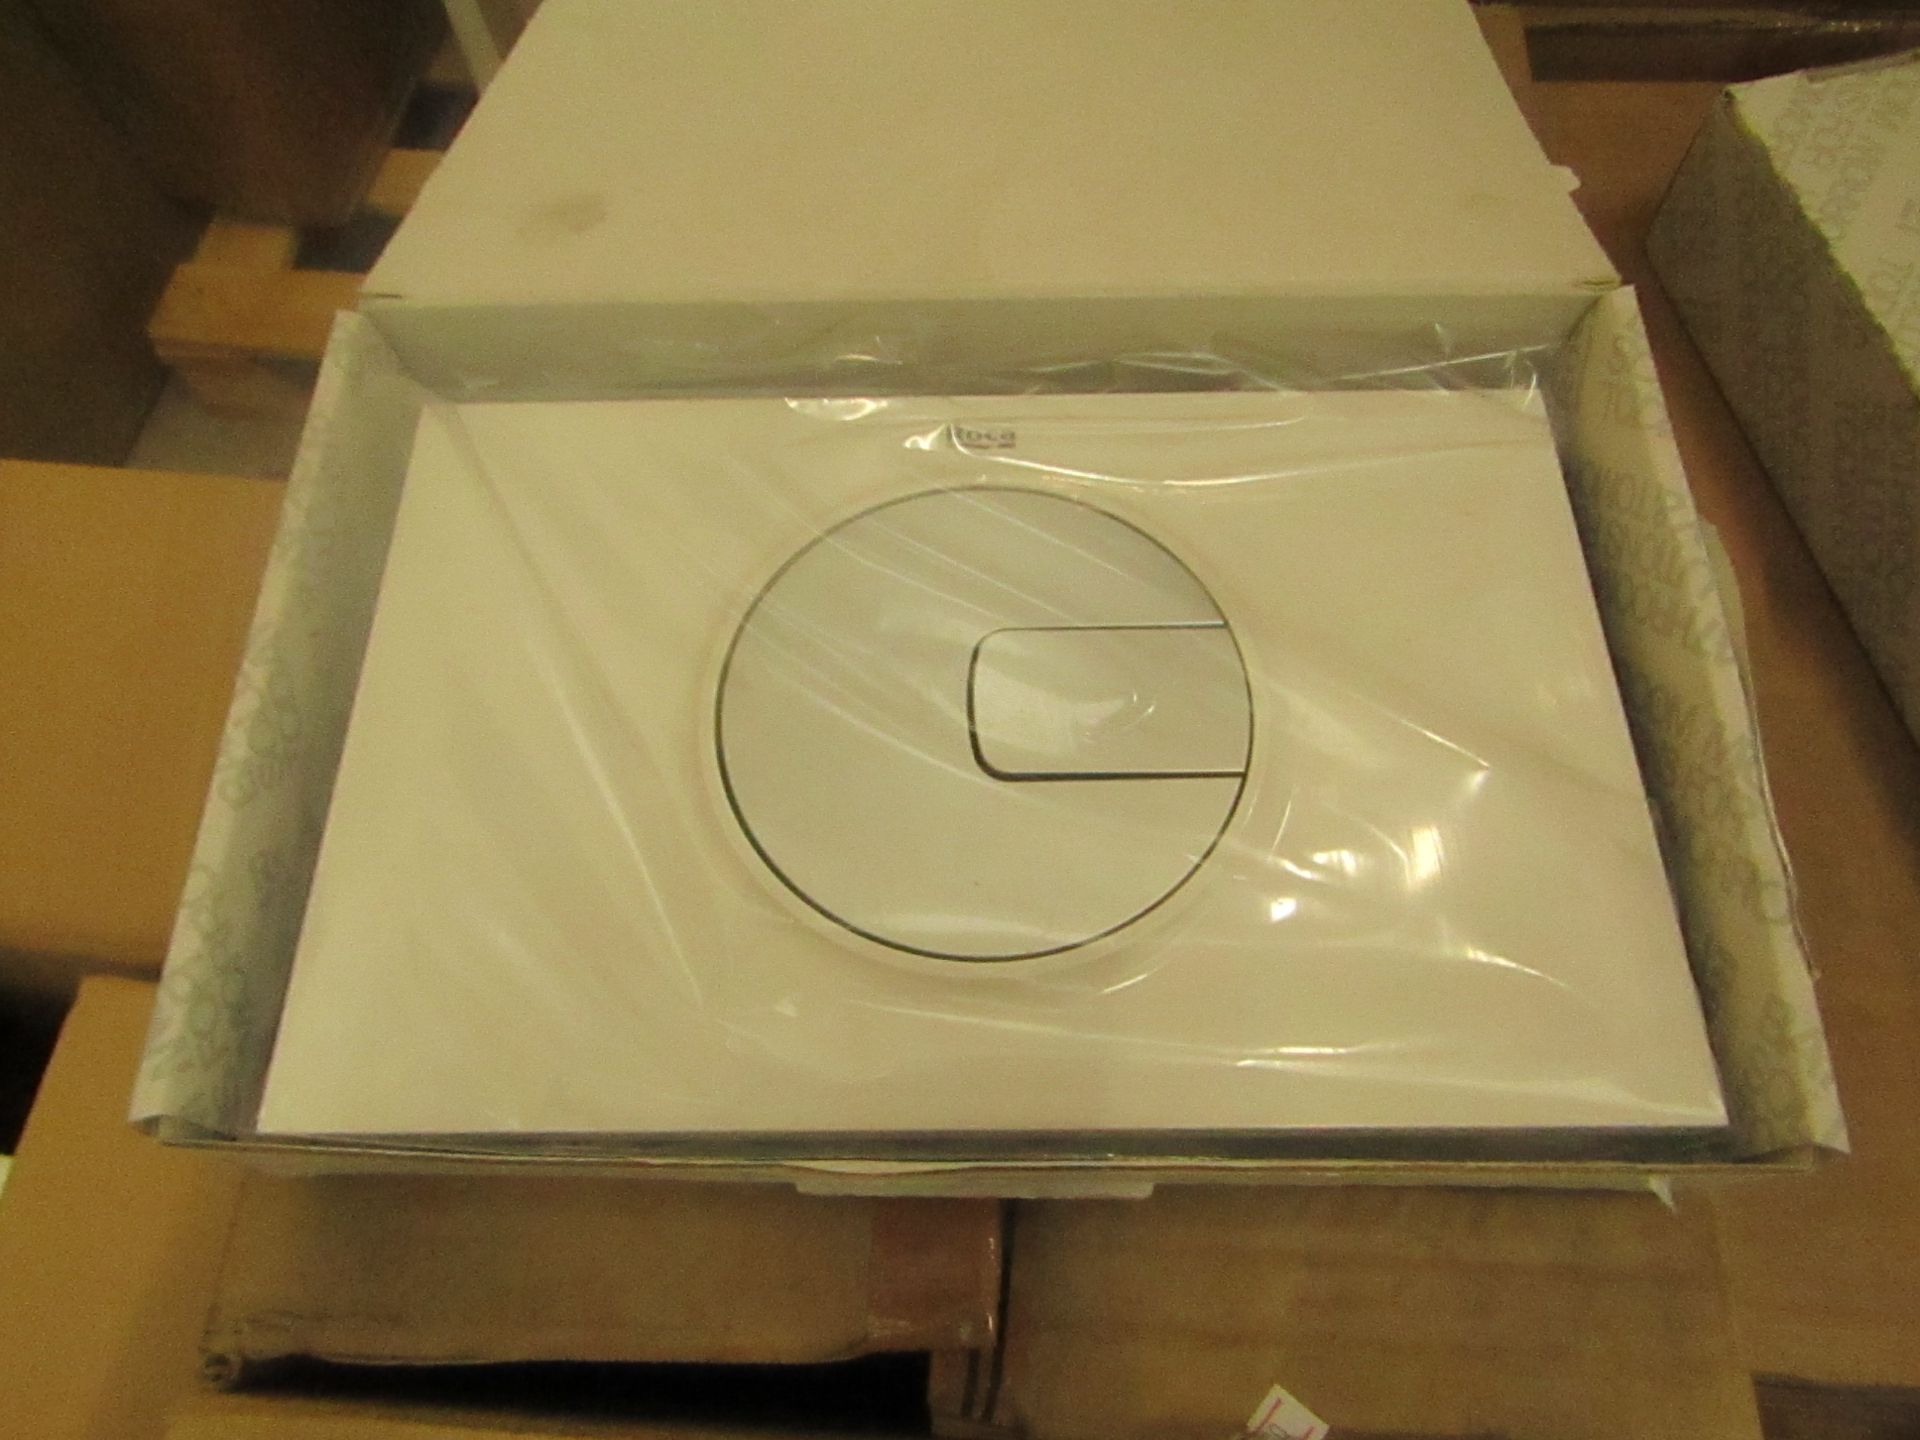 Roca PL6 Dual Combi Flush plate, new and boxed.